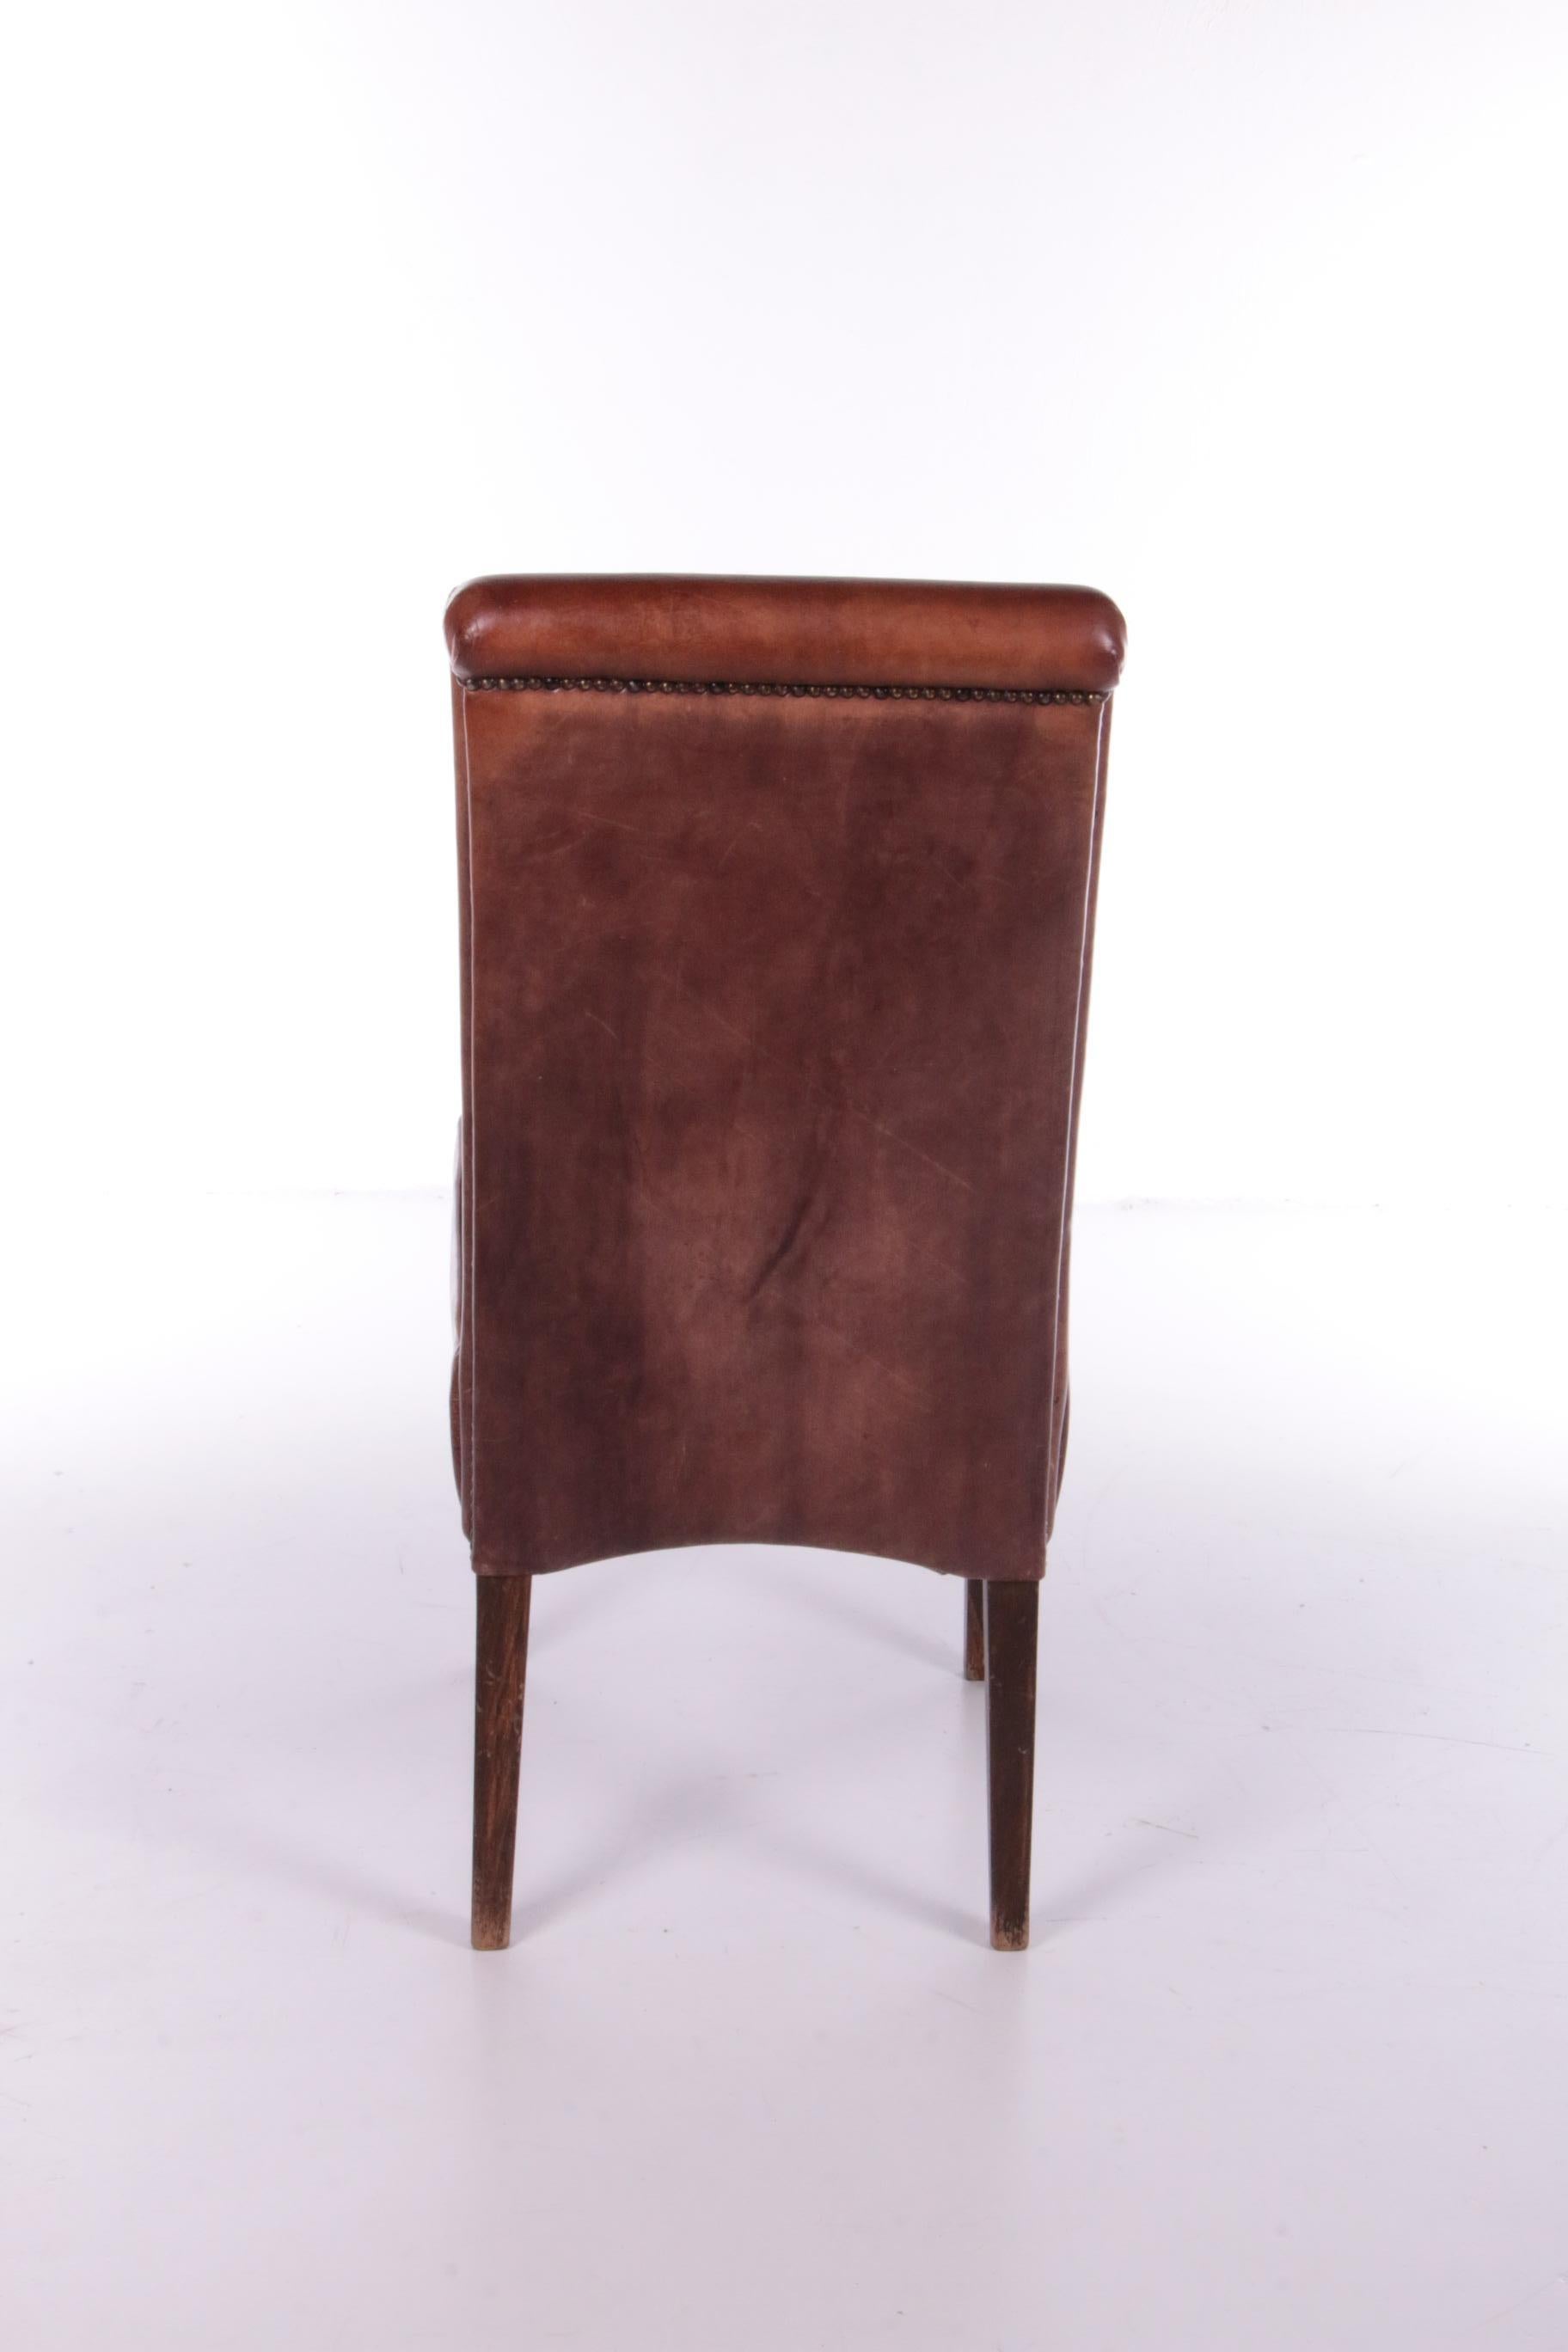 Patinated Set of 4 Sheepskin Leather Dining Table Chairs, 1970s